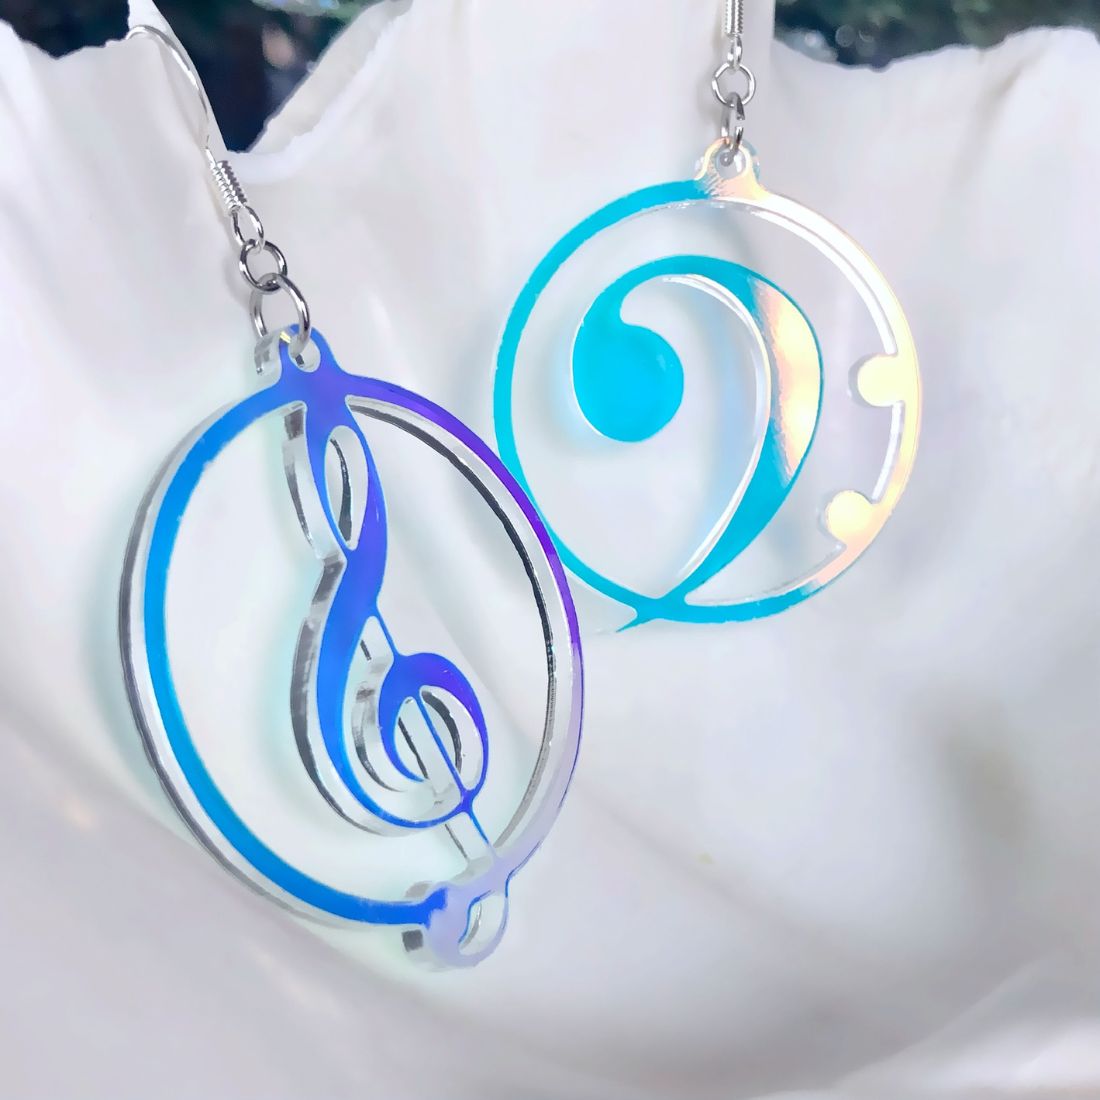 Music Lover's Treble and Bass Clef Earrings - Iridescent - Driftless Enchantments